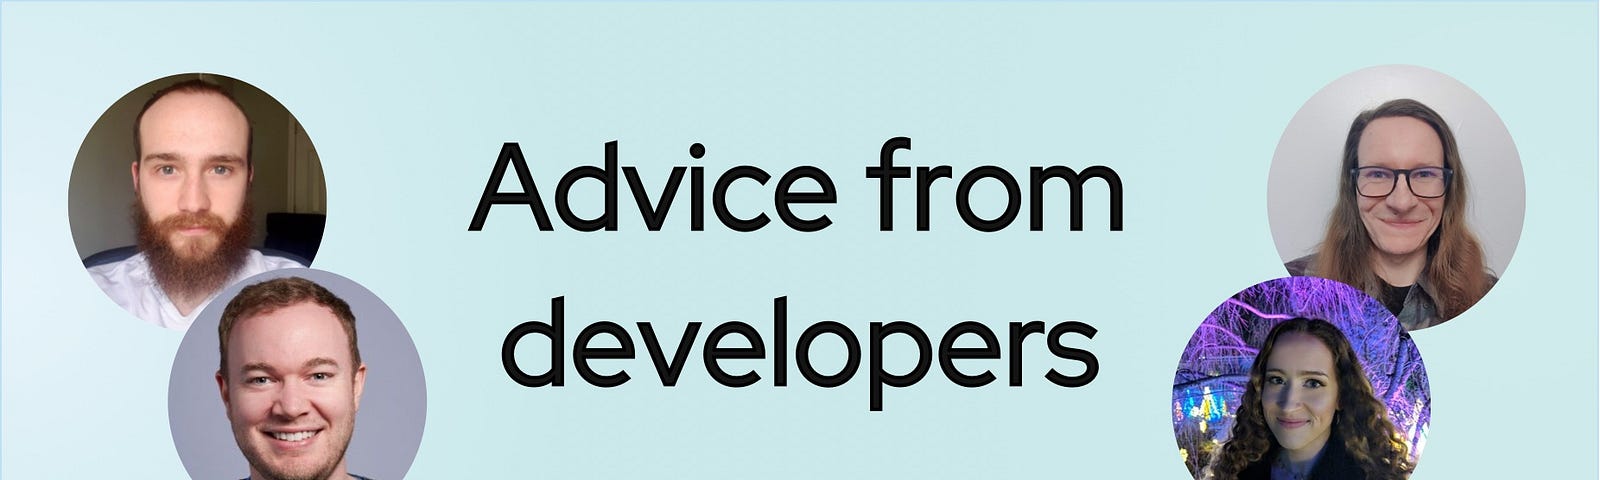 A banner that says “Advice from developers” with headshots of 4 developers